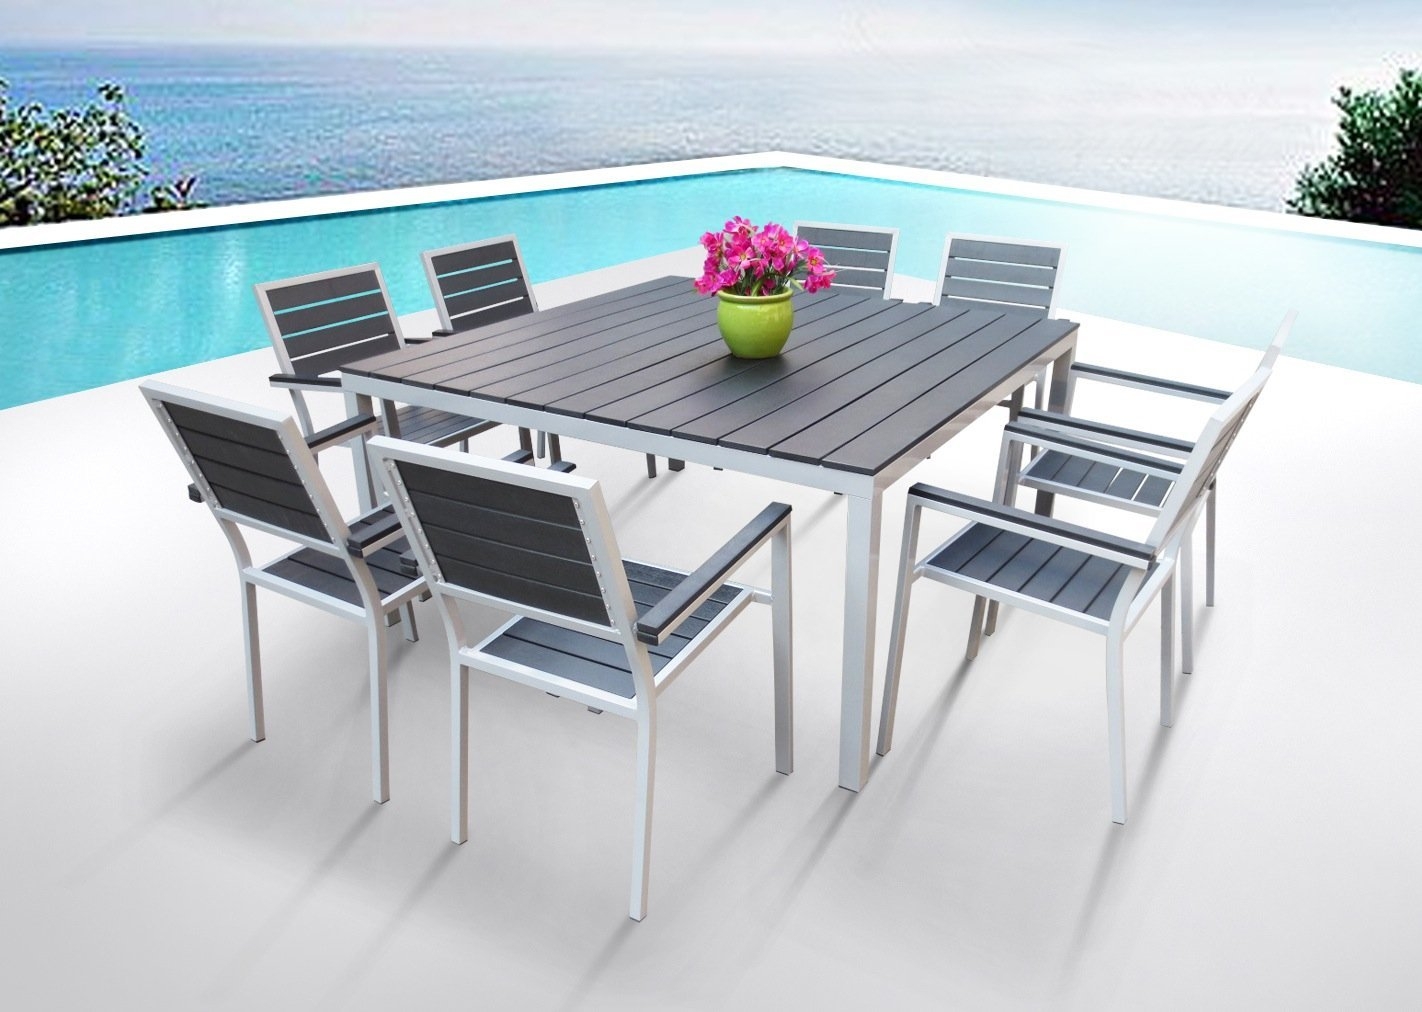 Outdoor Patio Furniture New Aluminum Resin 9-Piece Square Dining Table & Chairs Set